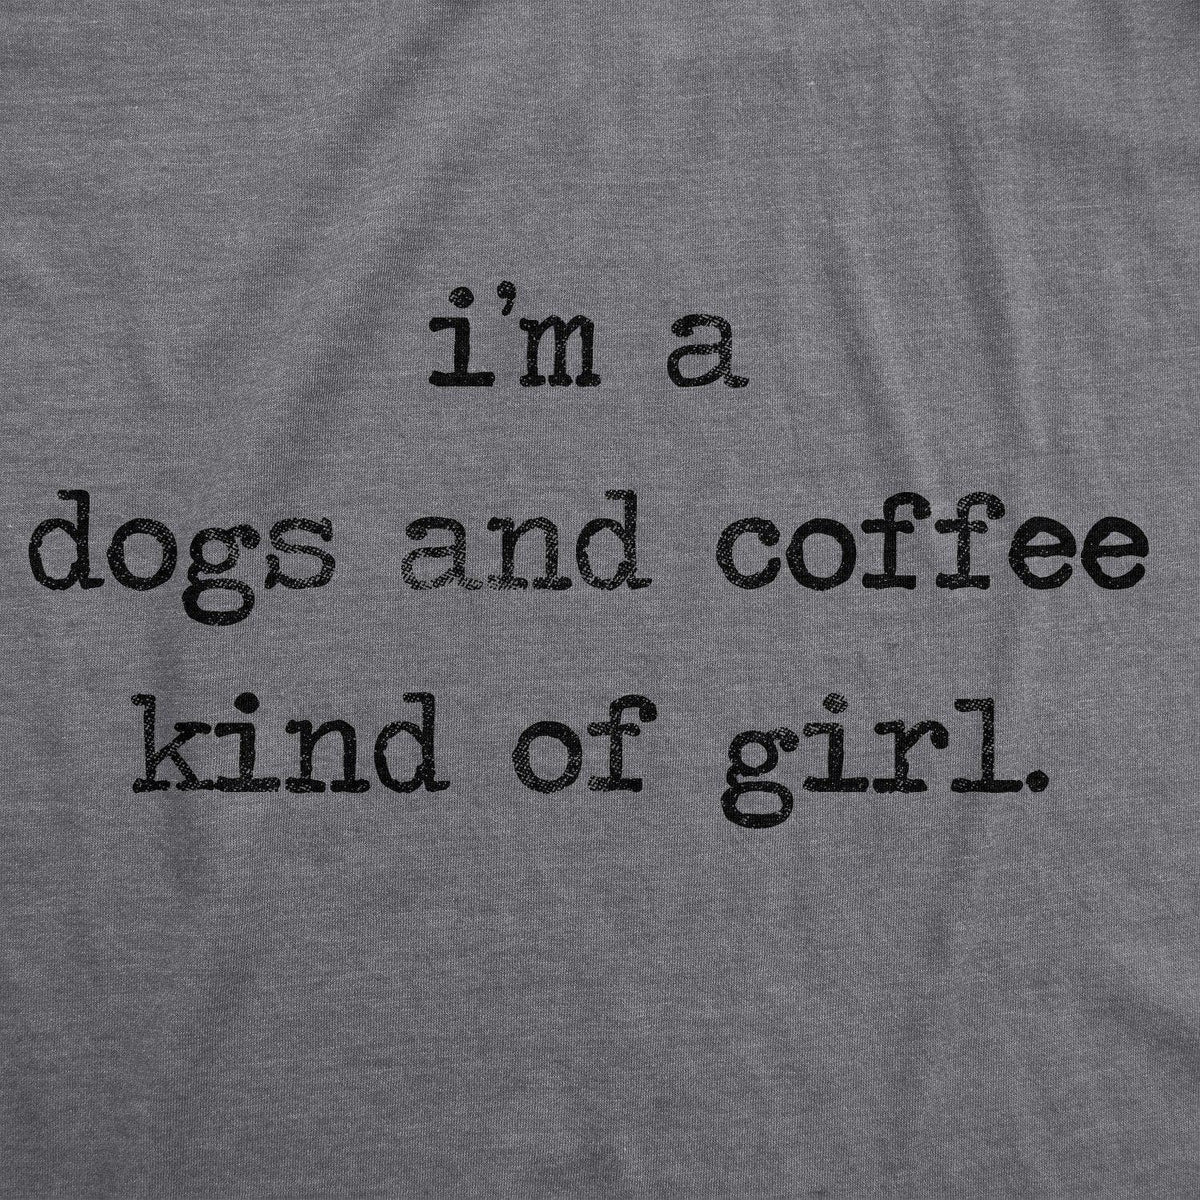 I&#39;m A Dogs And Coffee Kind Of Girl Women&#39;s Tshirt  -  Crazy Dog T-Shirts